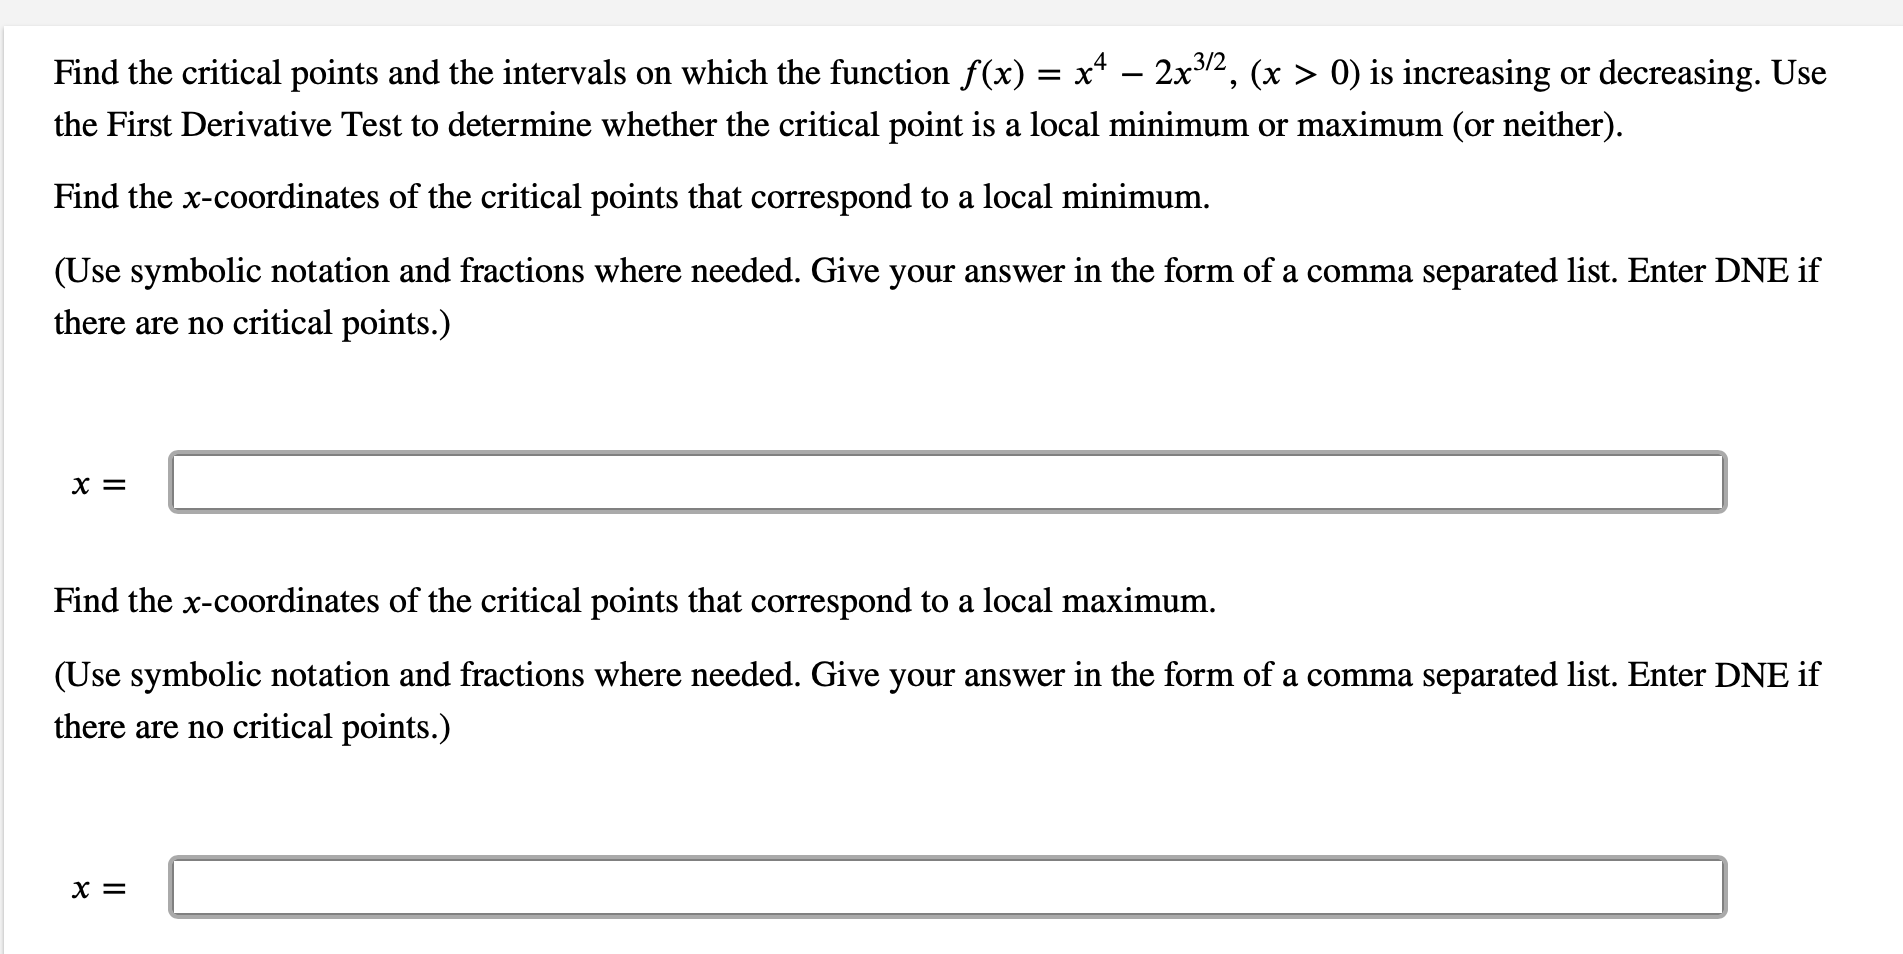 .3/2
Find the critical points and the intervals on which the function f(x) = x* – 2x2, (x > 0) is increasing or decreasing. Use
the First Derivative Test to determine whether the critical point is a local minimum or maximum (or neither).
Find the x-coordinates of the critical points that correspond to a local minimum.
(Use symbolic notation and fractions where needed. Give your answer in the form of a comma separated list. Enter DNE if
there are no critical points.)
